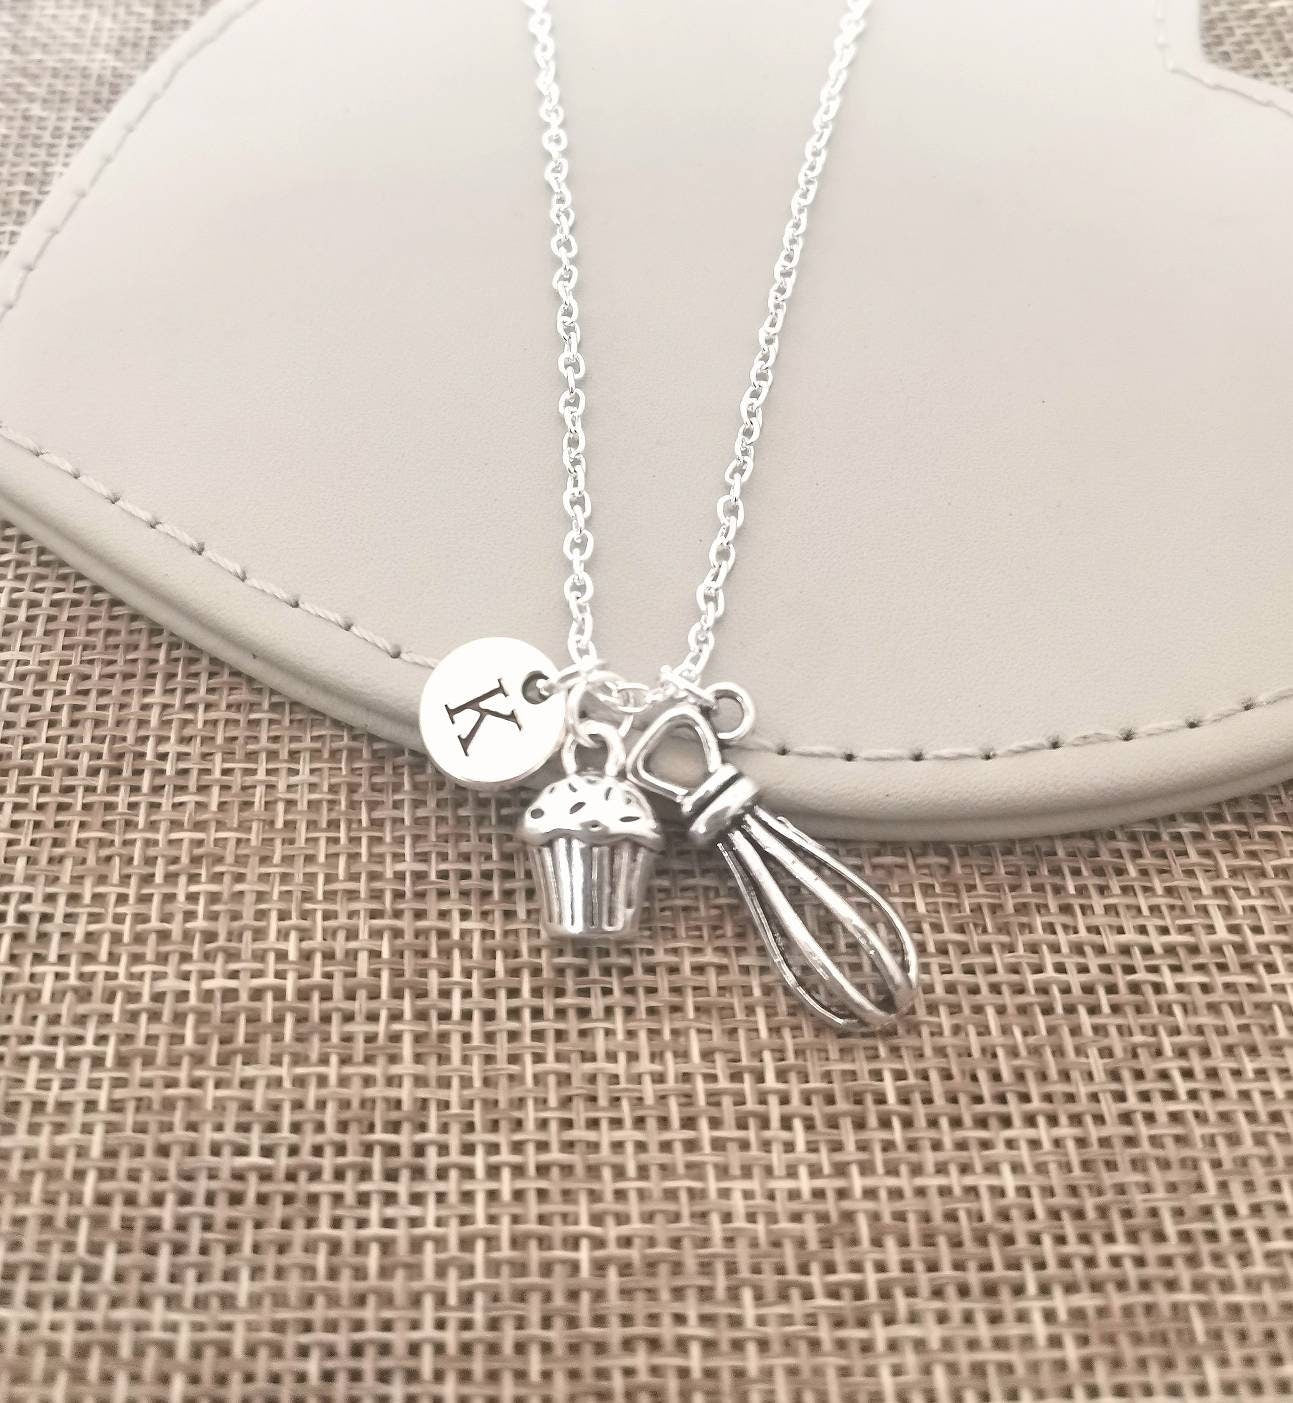 Gift for baker, Baking gifts, baking necklace, baker necklace, baker gifts, gifts baking, chef necklace, pastry chef, cooking gifts,cupcake